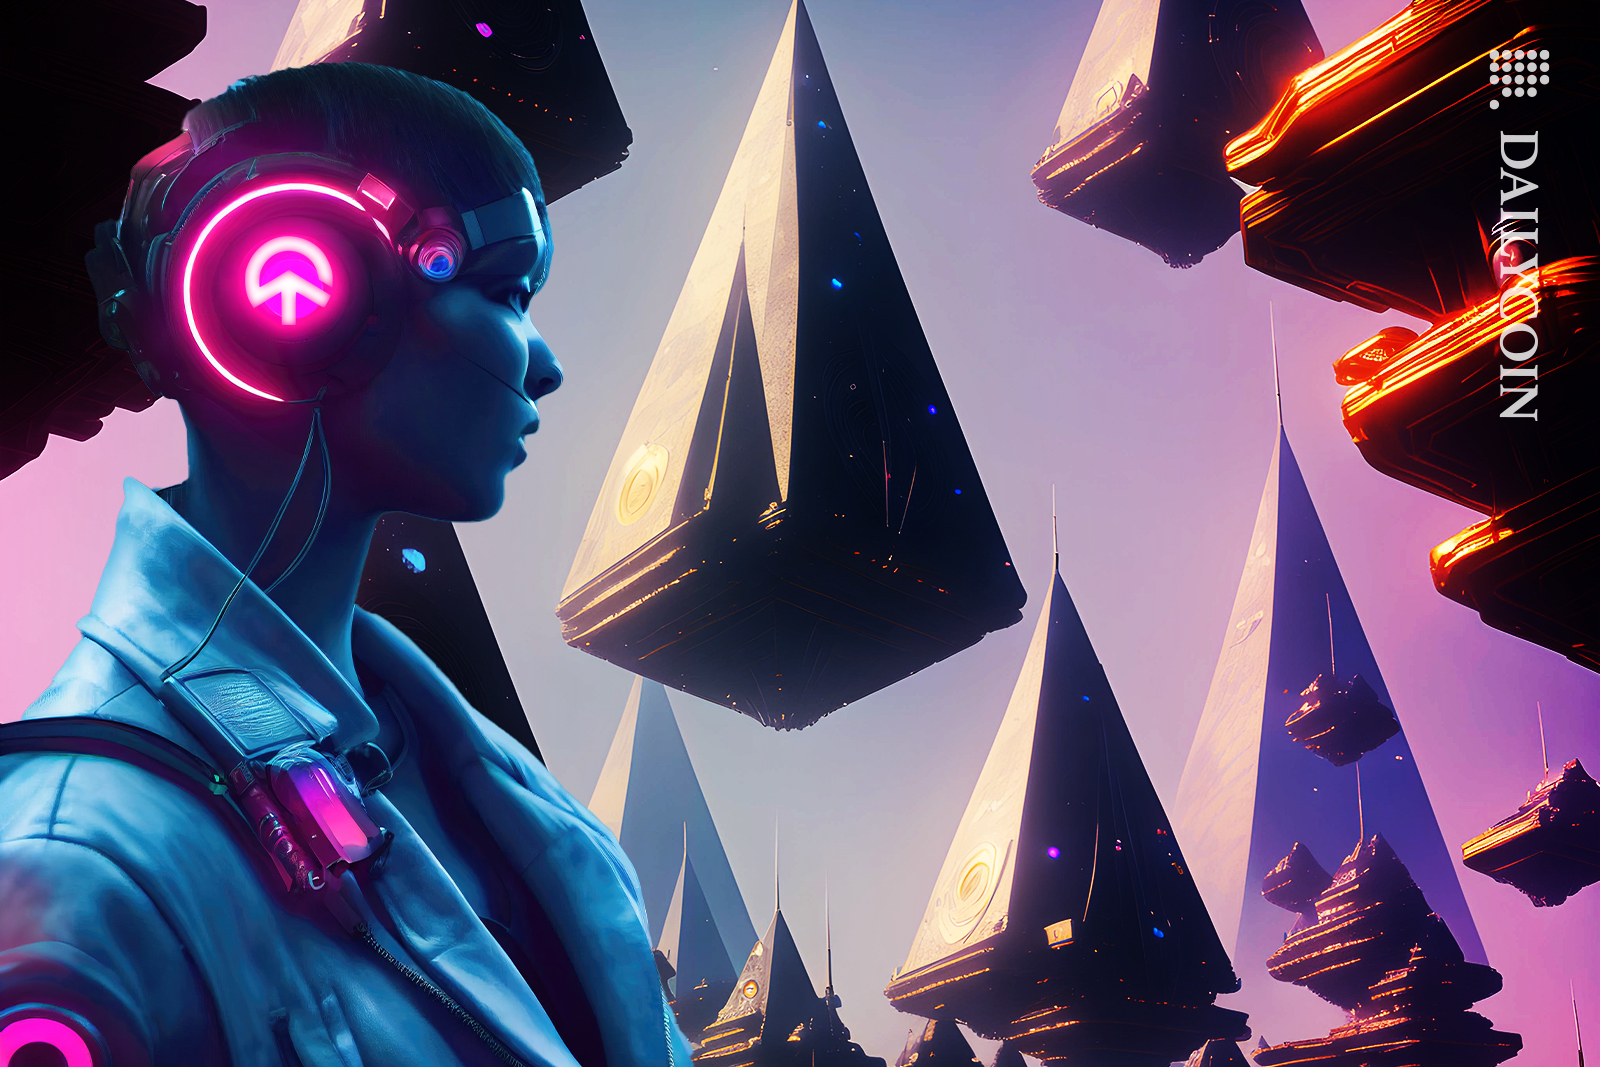 A robot of a woman with pink tomi headphones looking at floating glass pyramids.